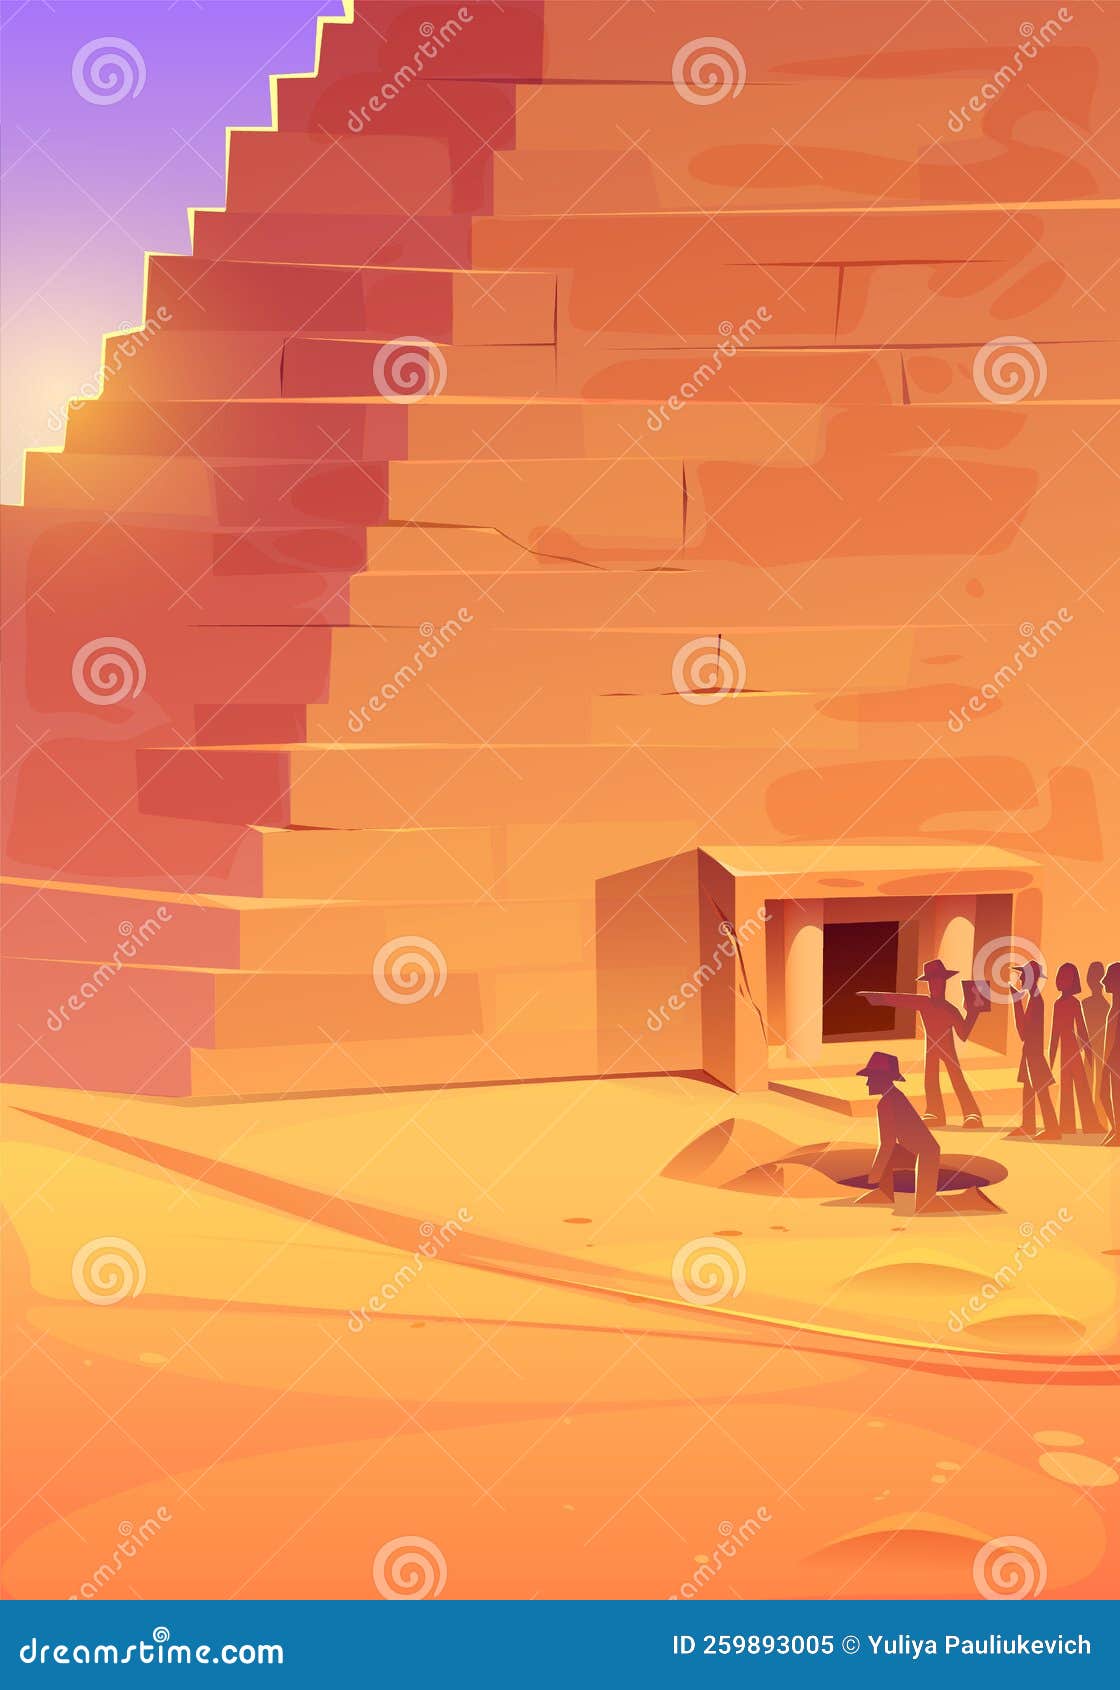 Egypt Pyramid in Desert and People Group at Door Stock Illustration ...